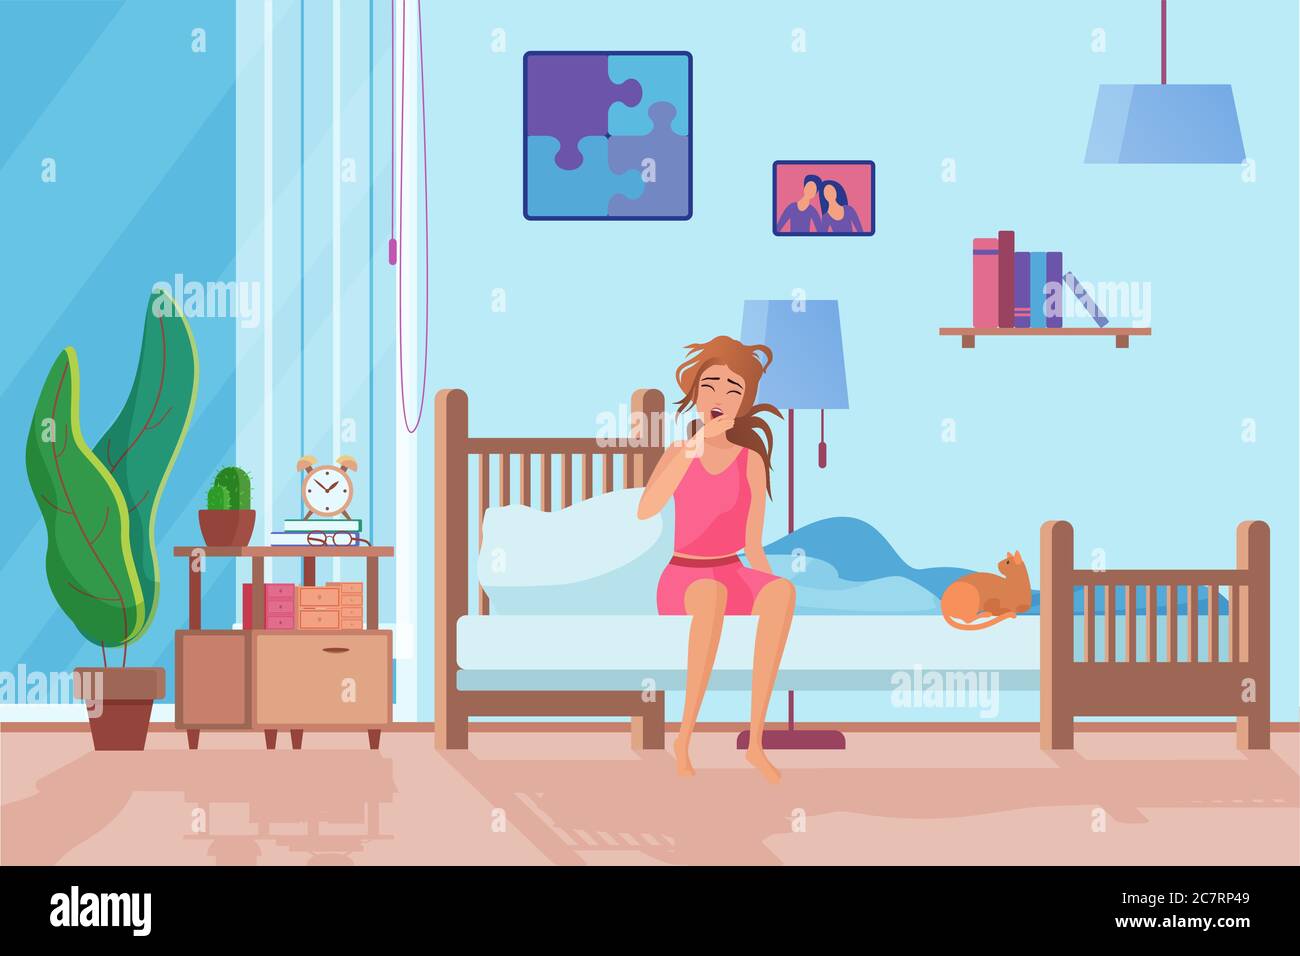 Exhausted woman in morning flat vector illustration. Tired gilr waking up, sitting on bed. Sad, depressed female cartoon character. Unhappy woman, red cat in room. Lady bedroom interior design Stock Vector